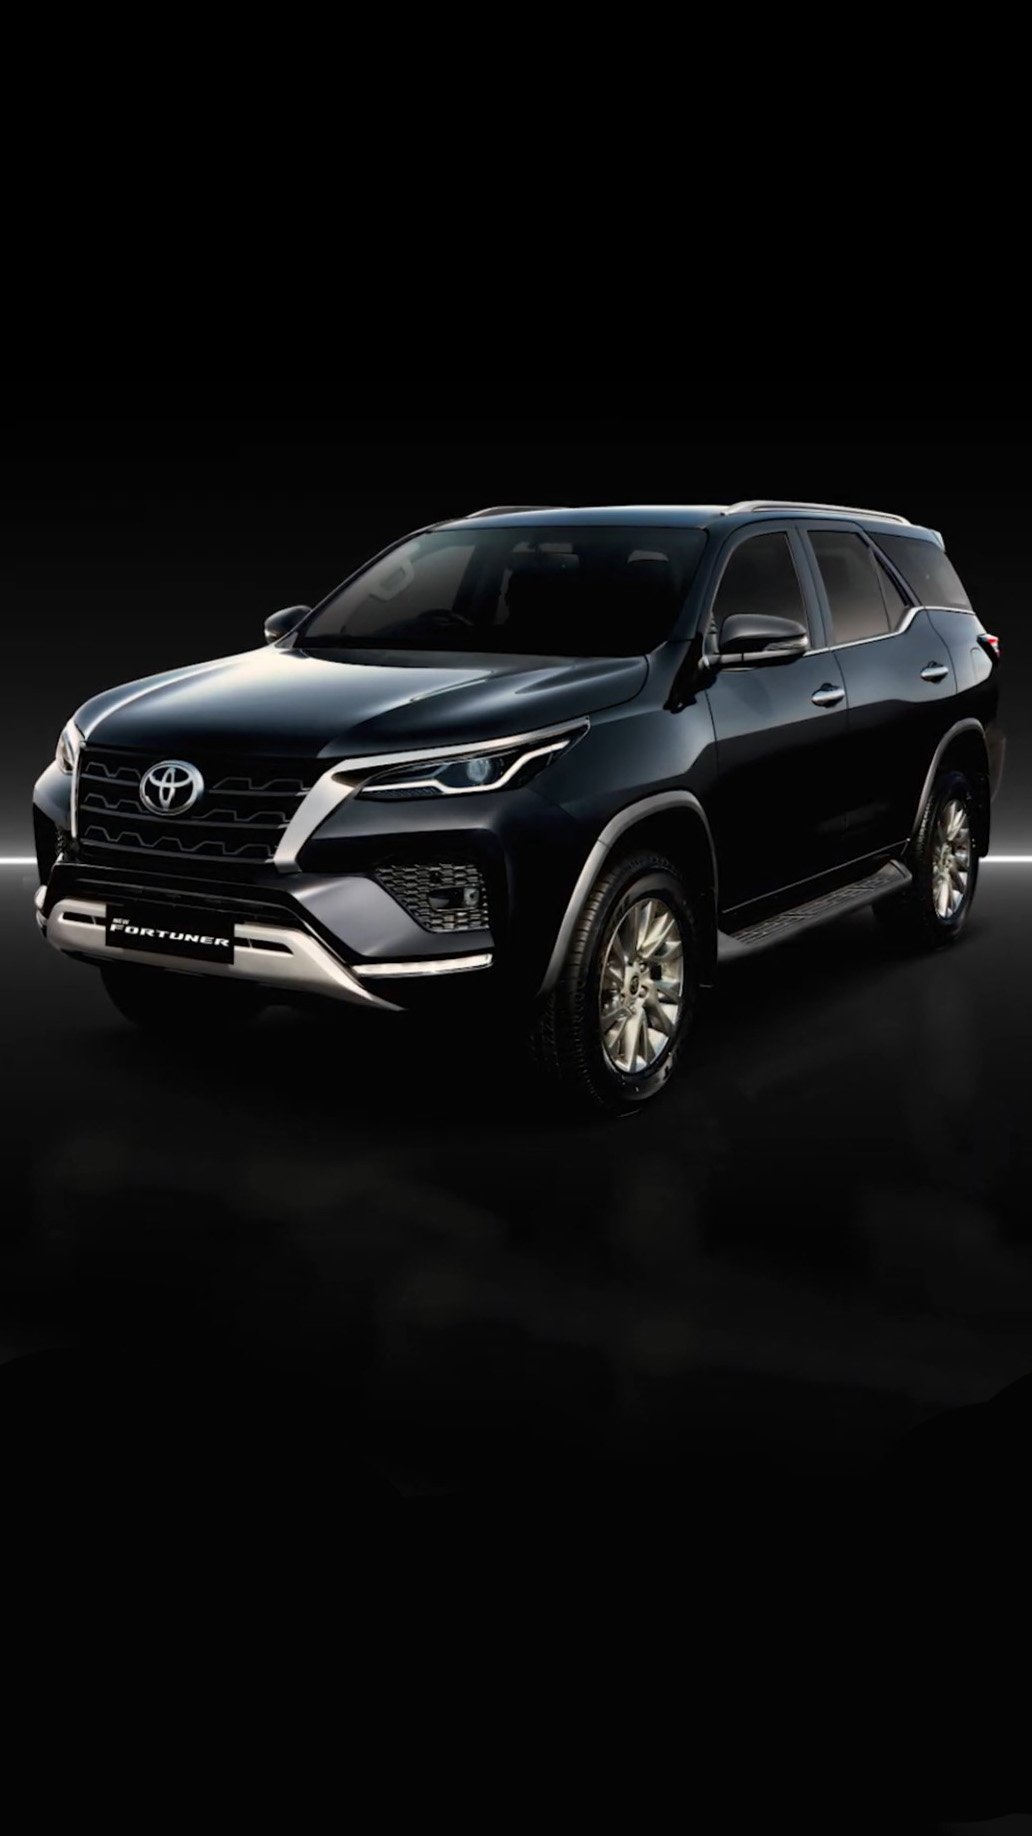 Toyota Fortuner 2021 Wallpapers  Top Free Toyota Fortuner 2021 Backgrounds   WallpaperAccess